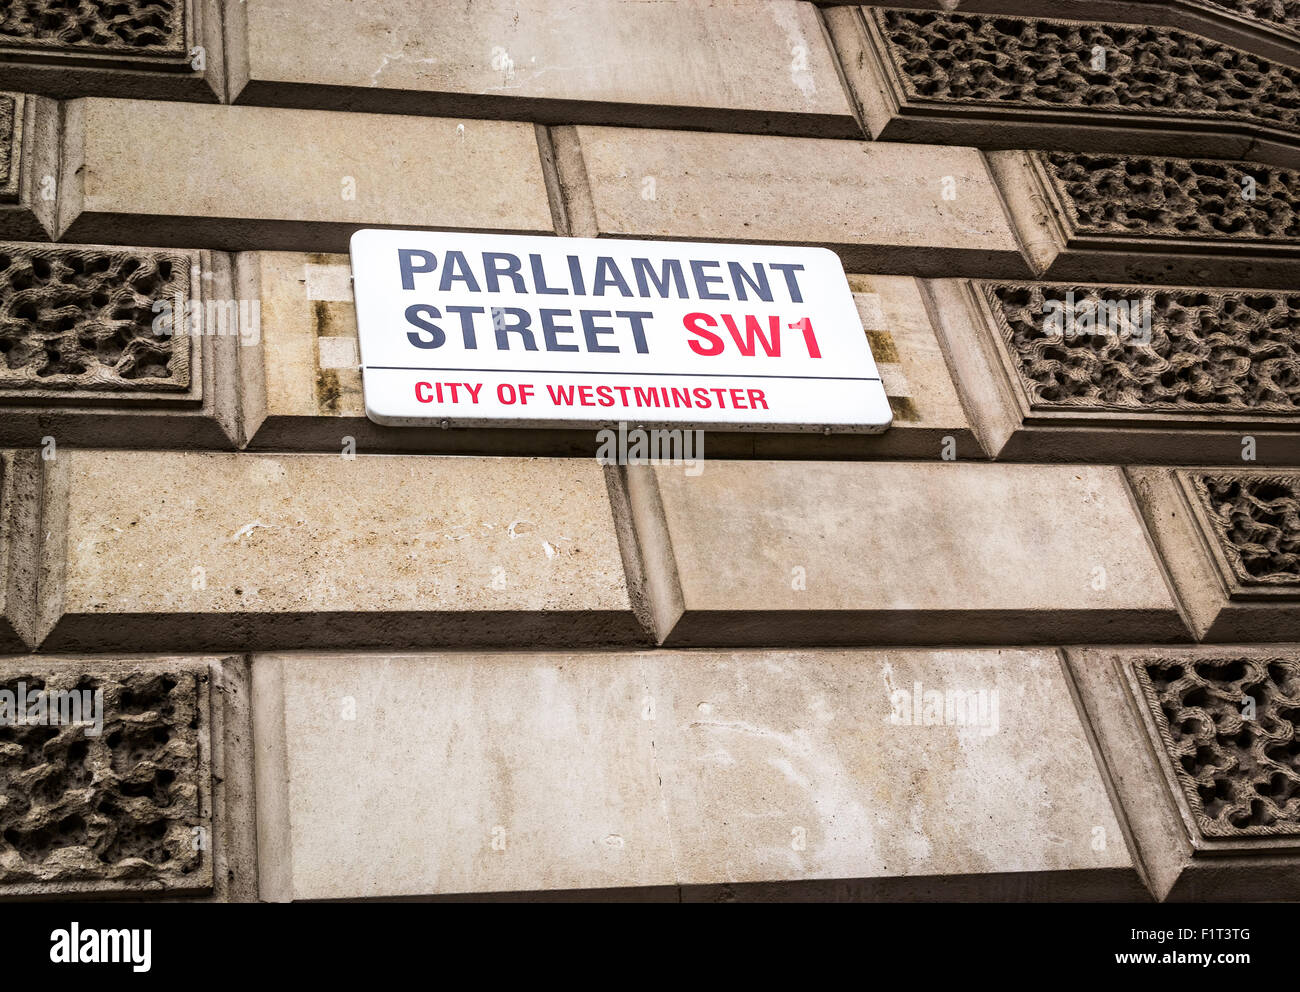 Famous Parliament Street road sign in London on a building exterior using traditional bright red text Stock Photo